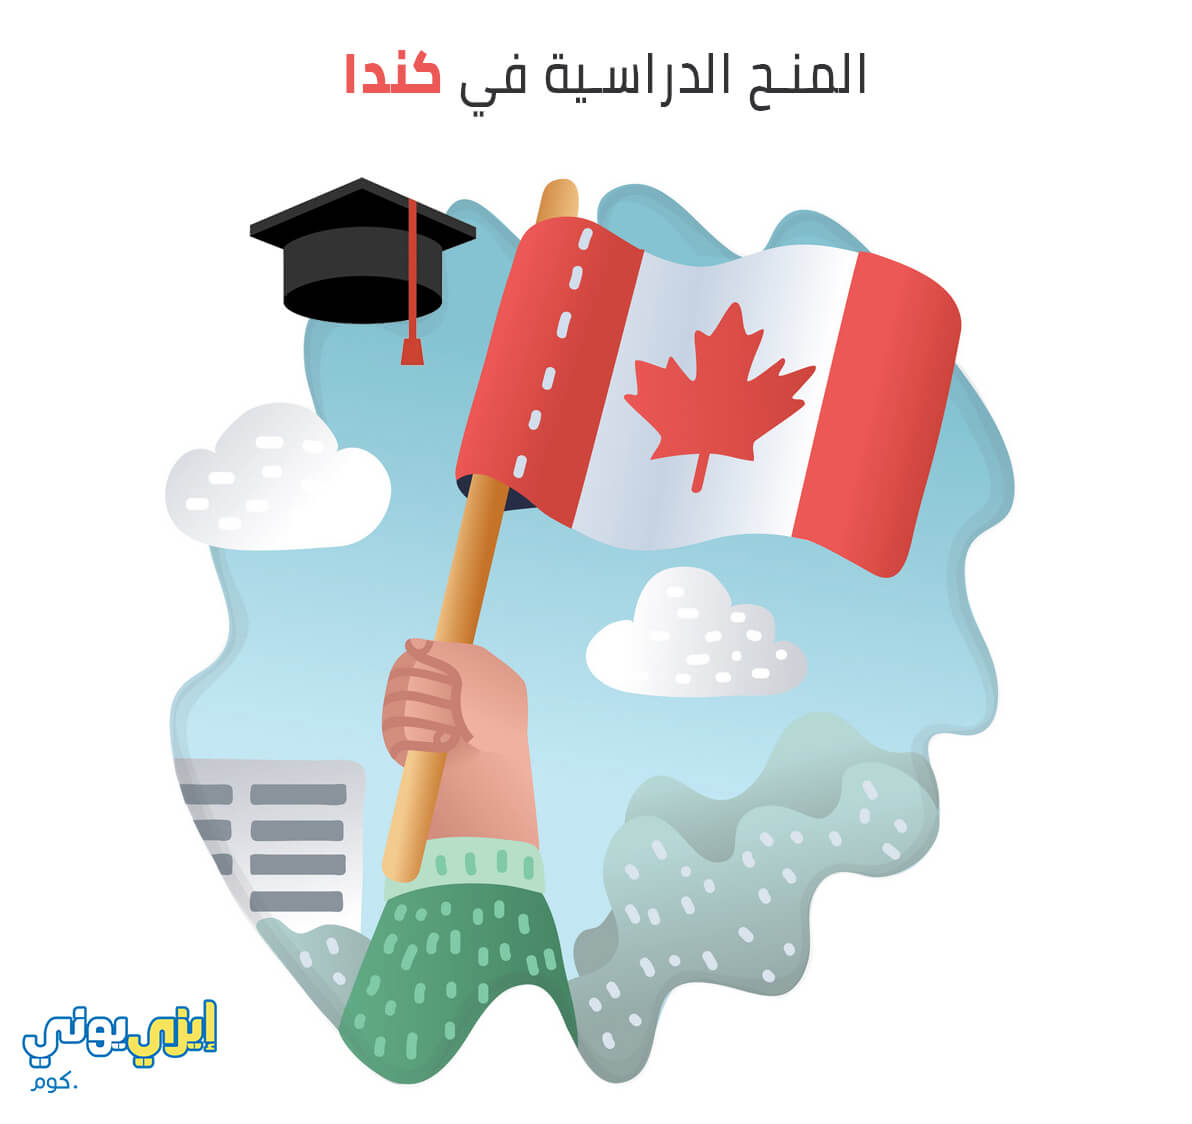 Scholarships to study in Canada